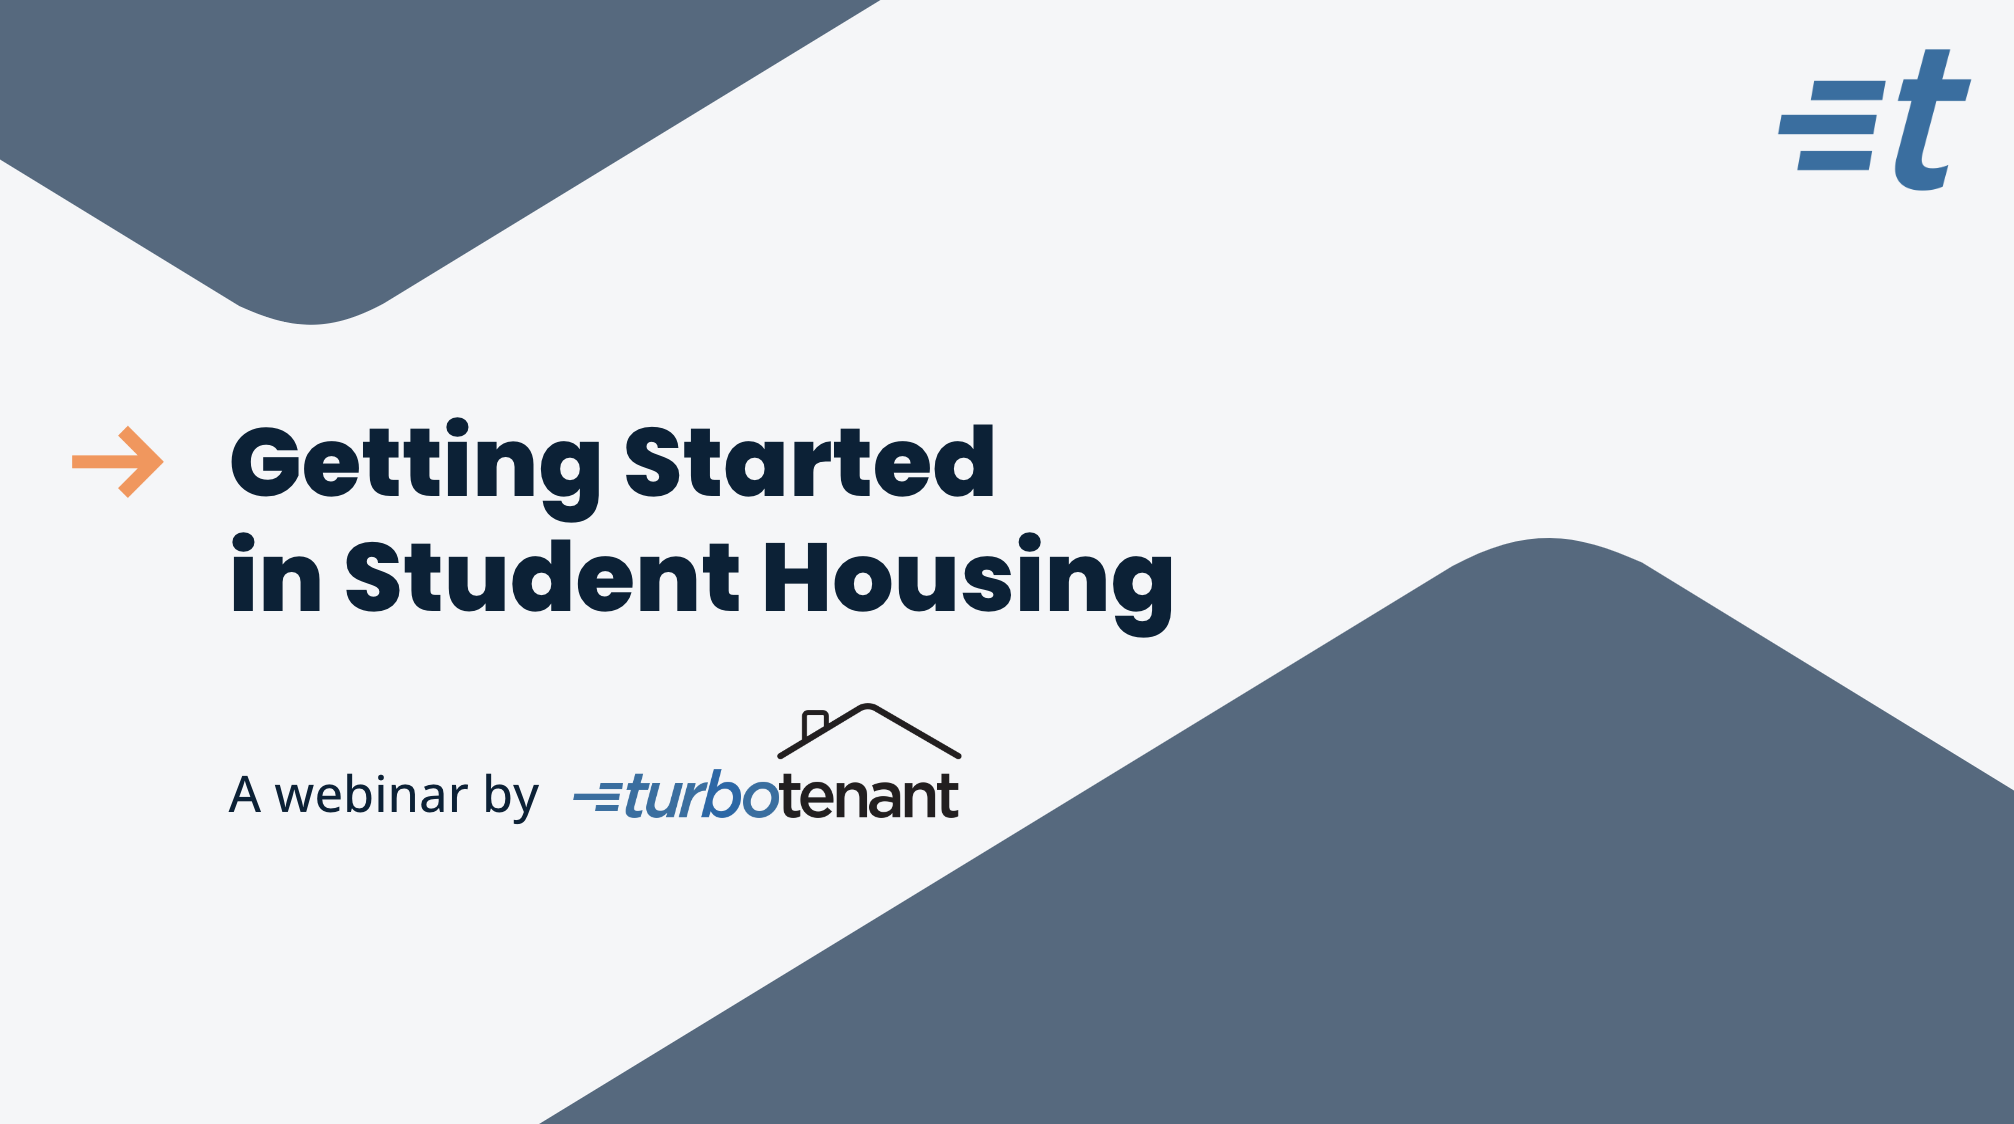 Getting Started in Student Housing